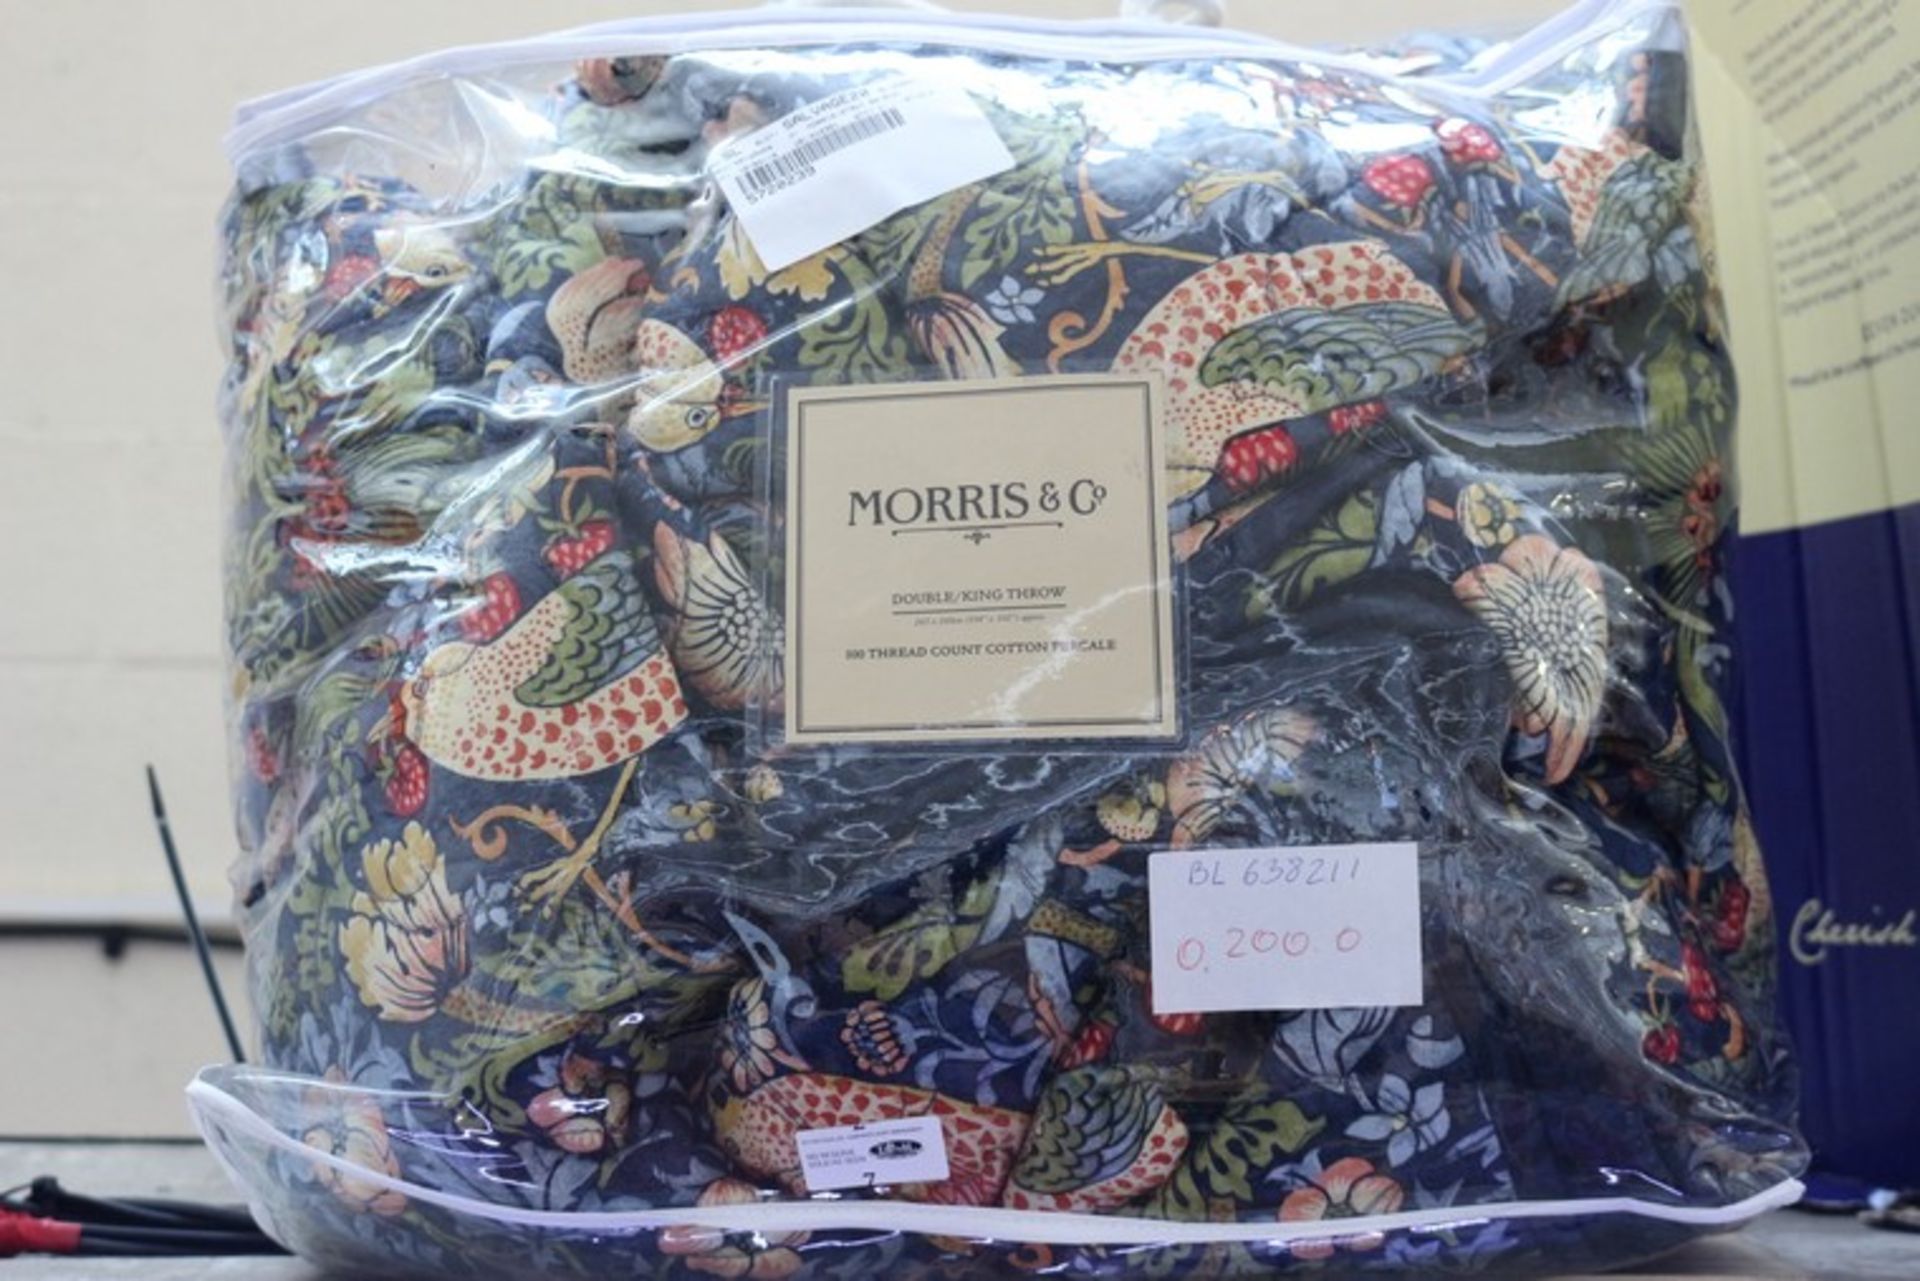 1 x MORRIS AND CO DOUBLE/KING FLORAL PRINT THROW RRP £200 *PLEASE NOTE THAT THE BID PRICE IS